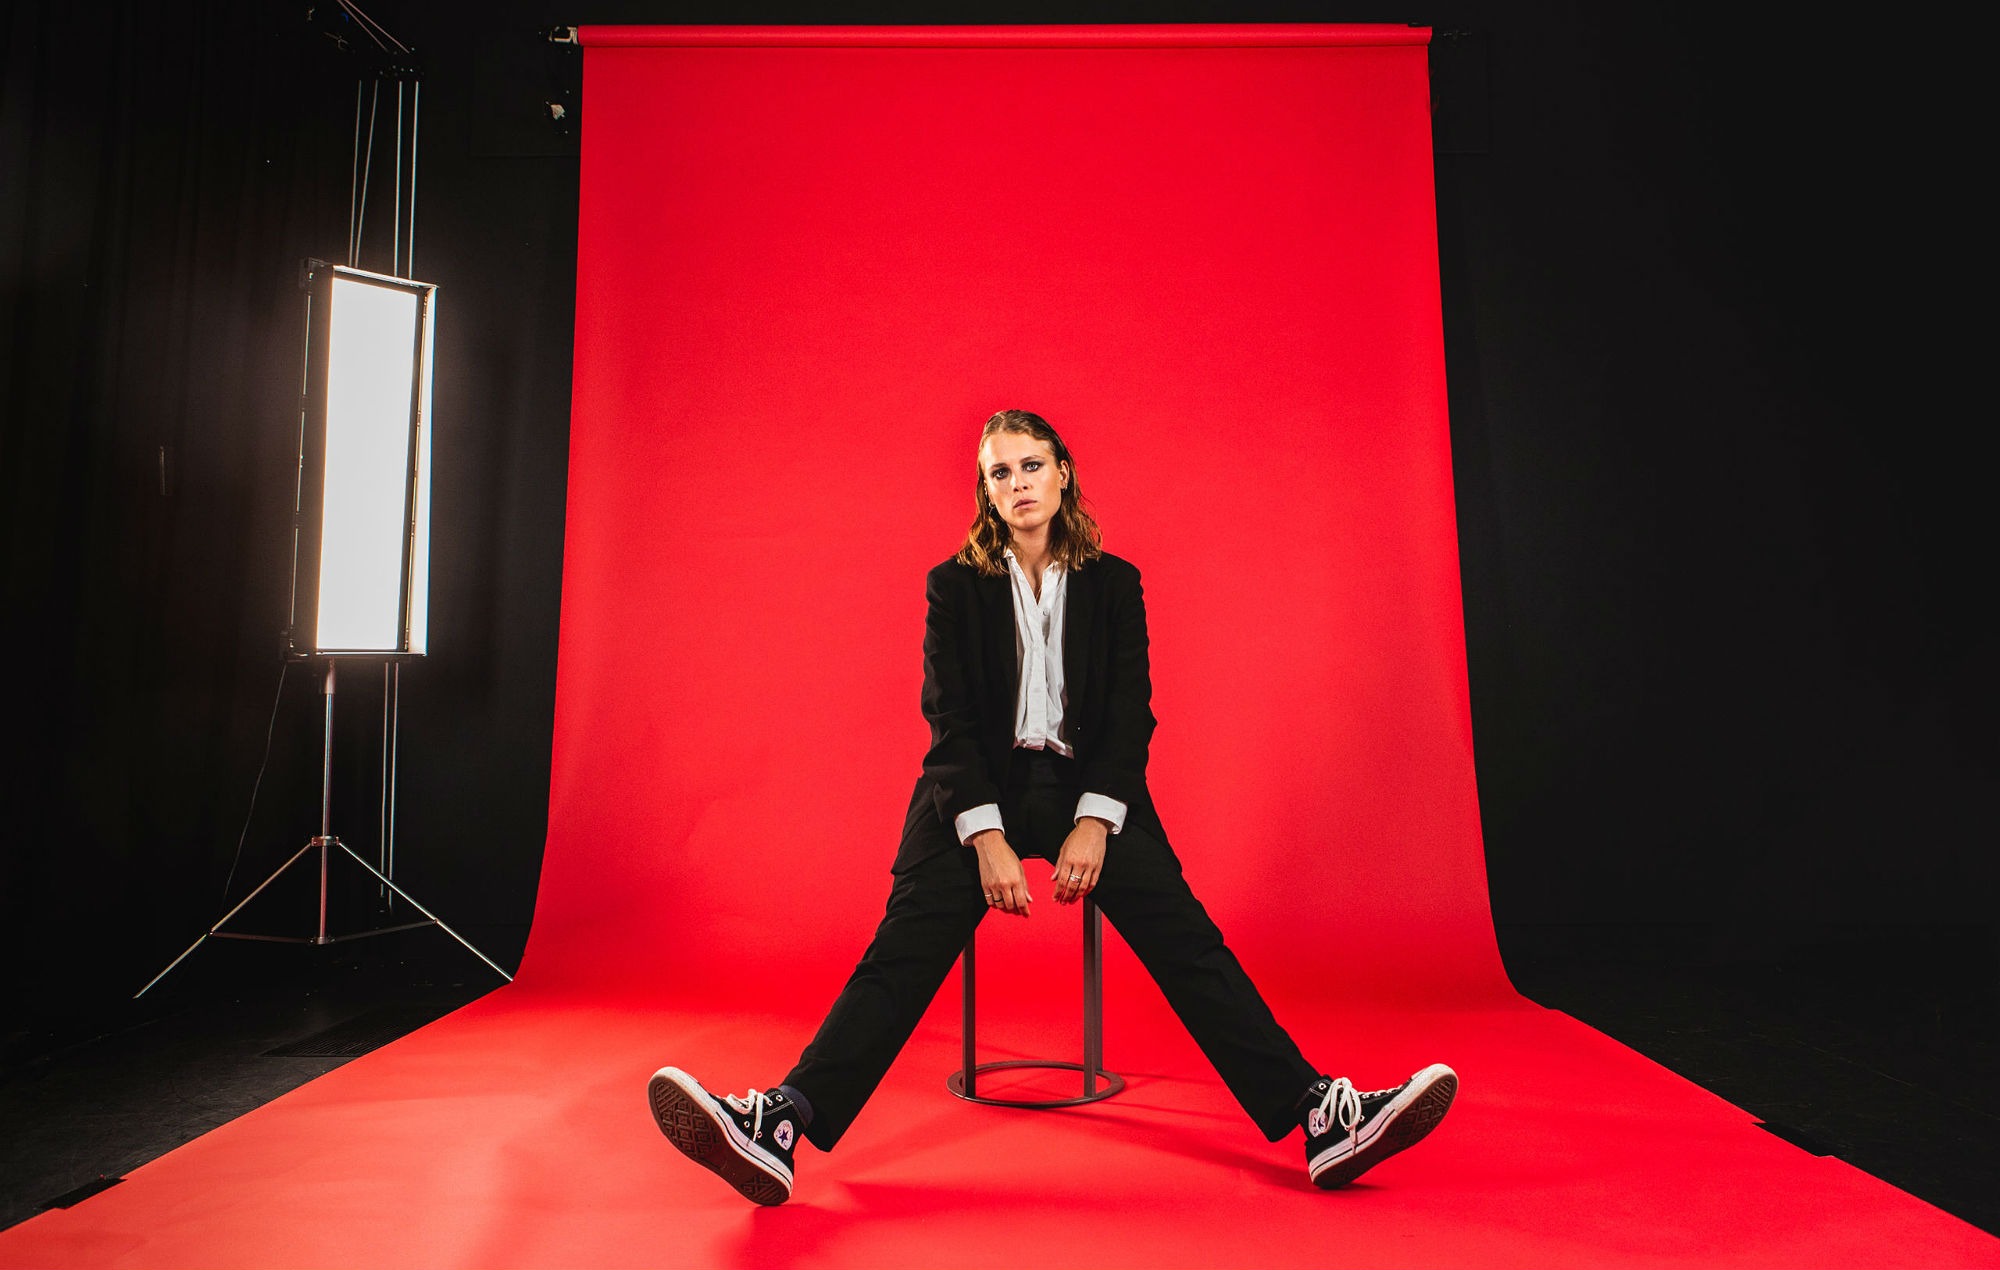 Marika Hackman on her “dark” new covers album, and living at her parents’ through lockdown